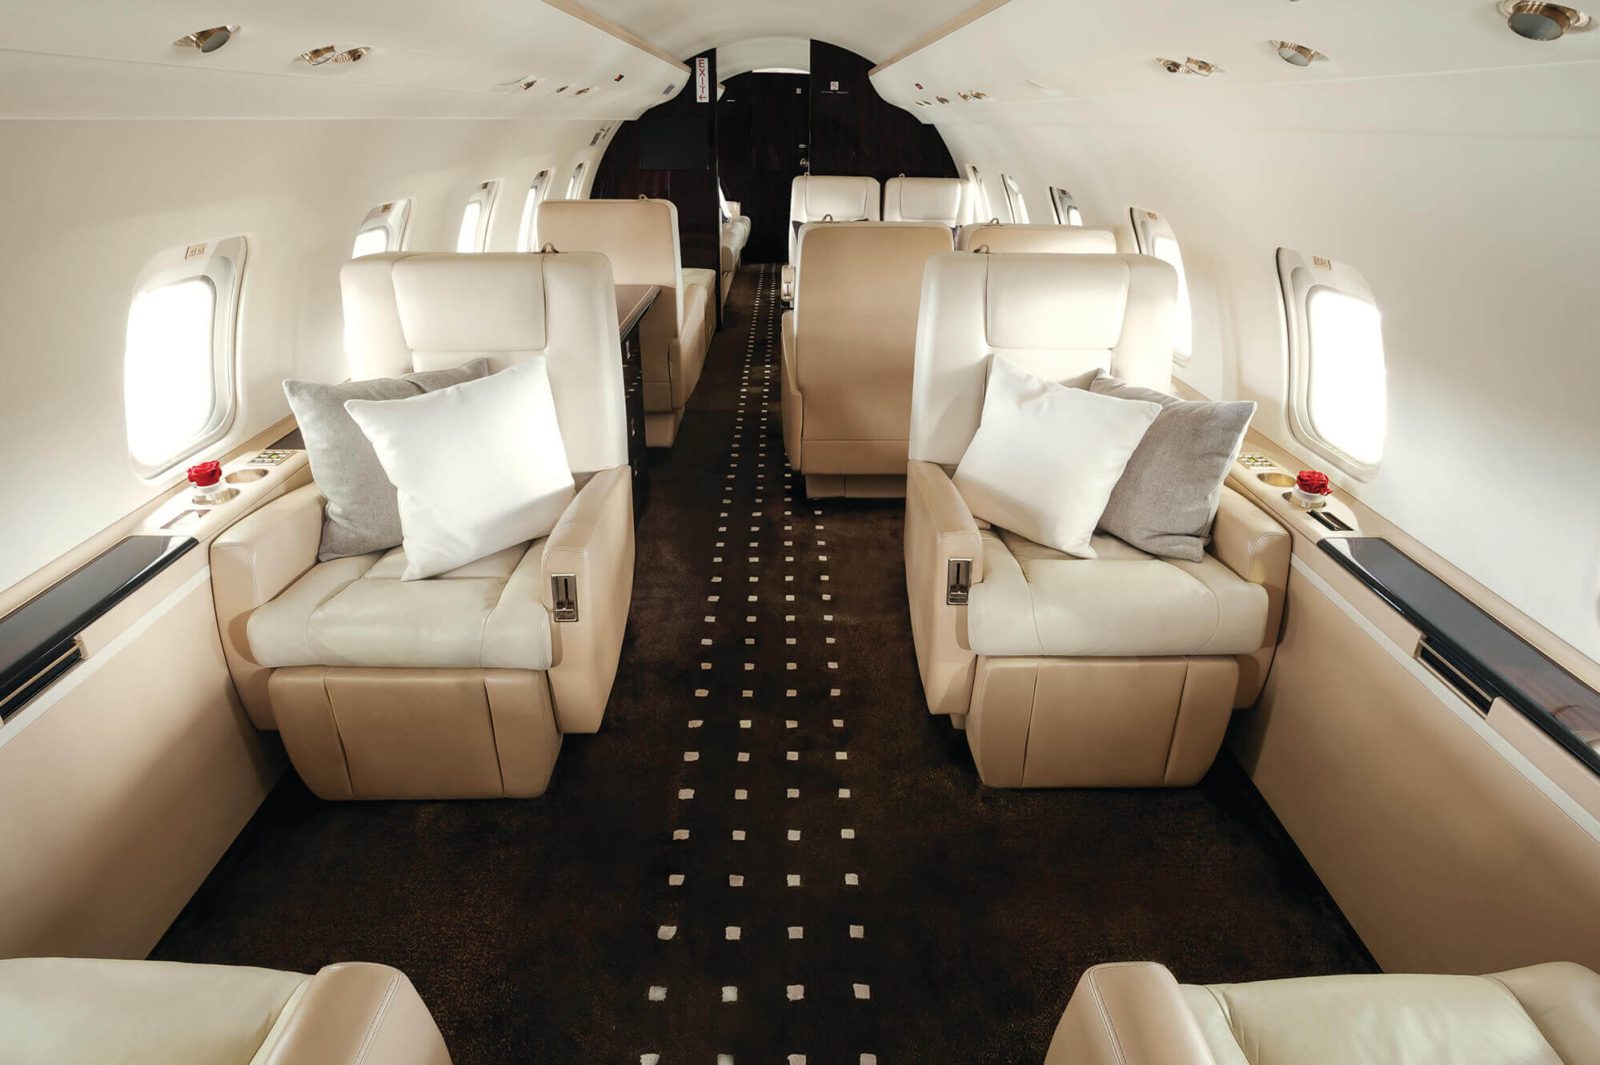 Save Up to 75% with our empty leg flights | Private Jet ...
